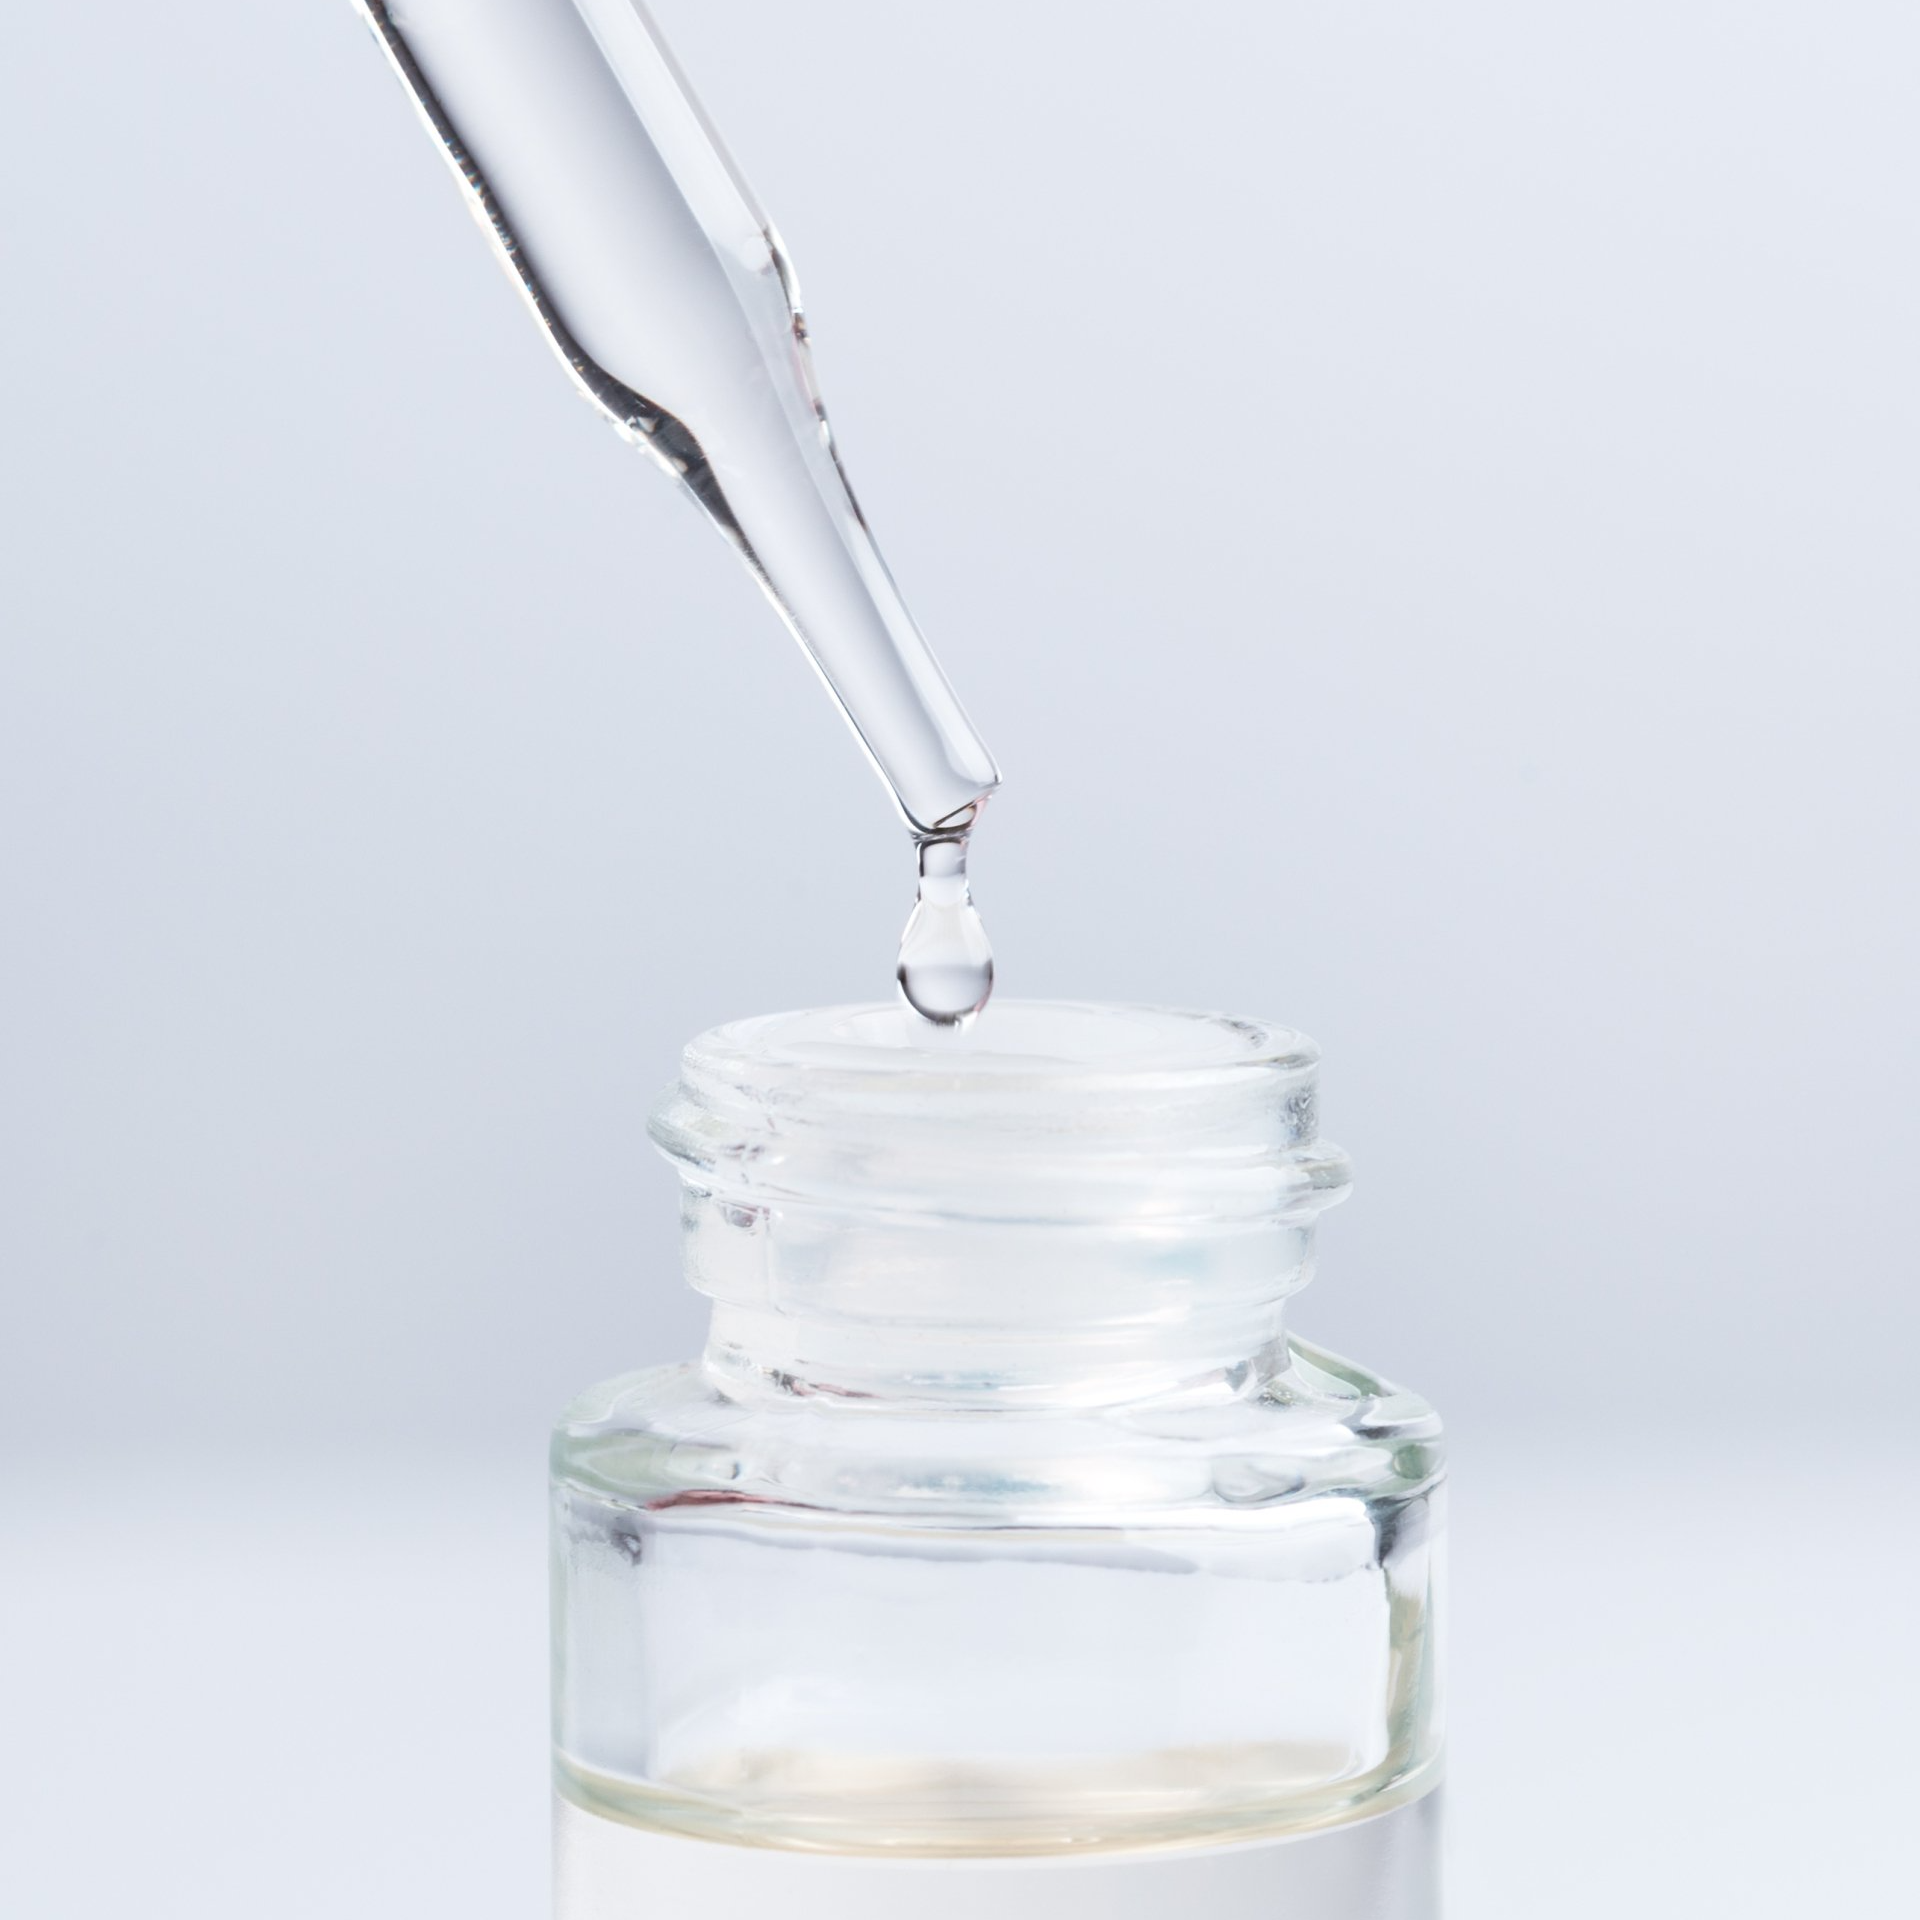 Dropping serum or collagen from a pipette. A pipette adding a drop of fluid or cosmetic oil to vial on a light background. Medicine or beauty industry concept.